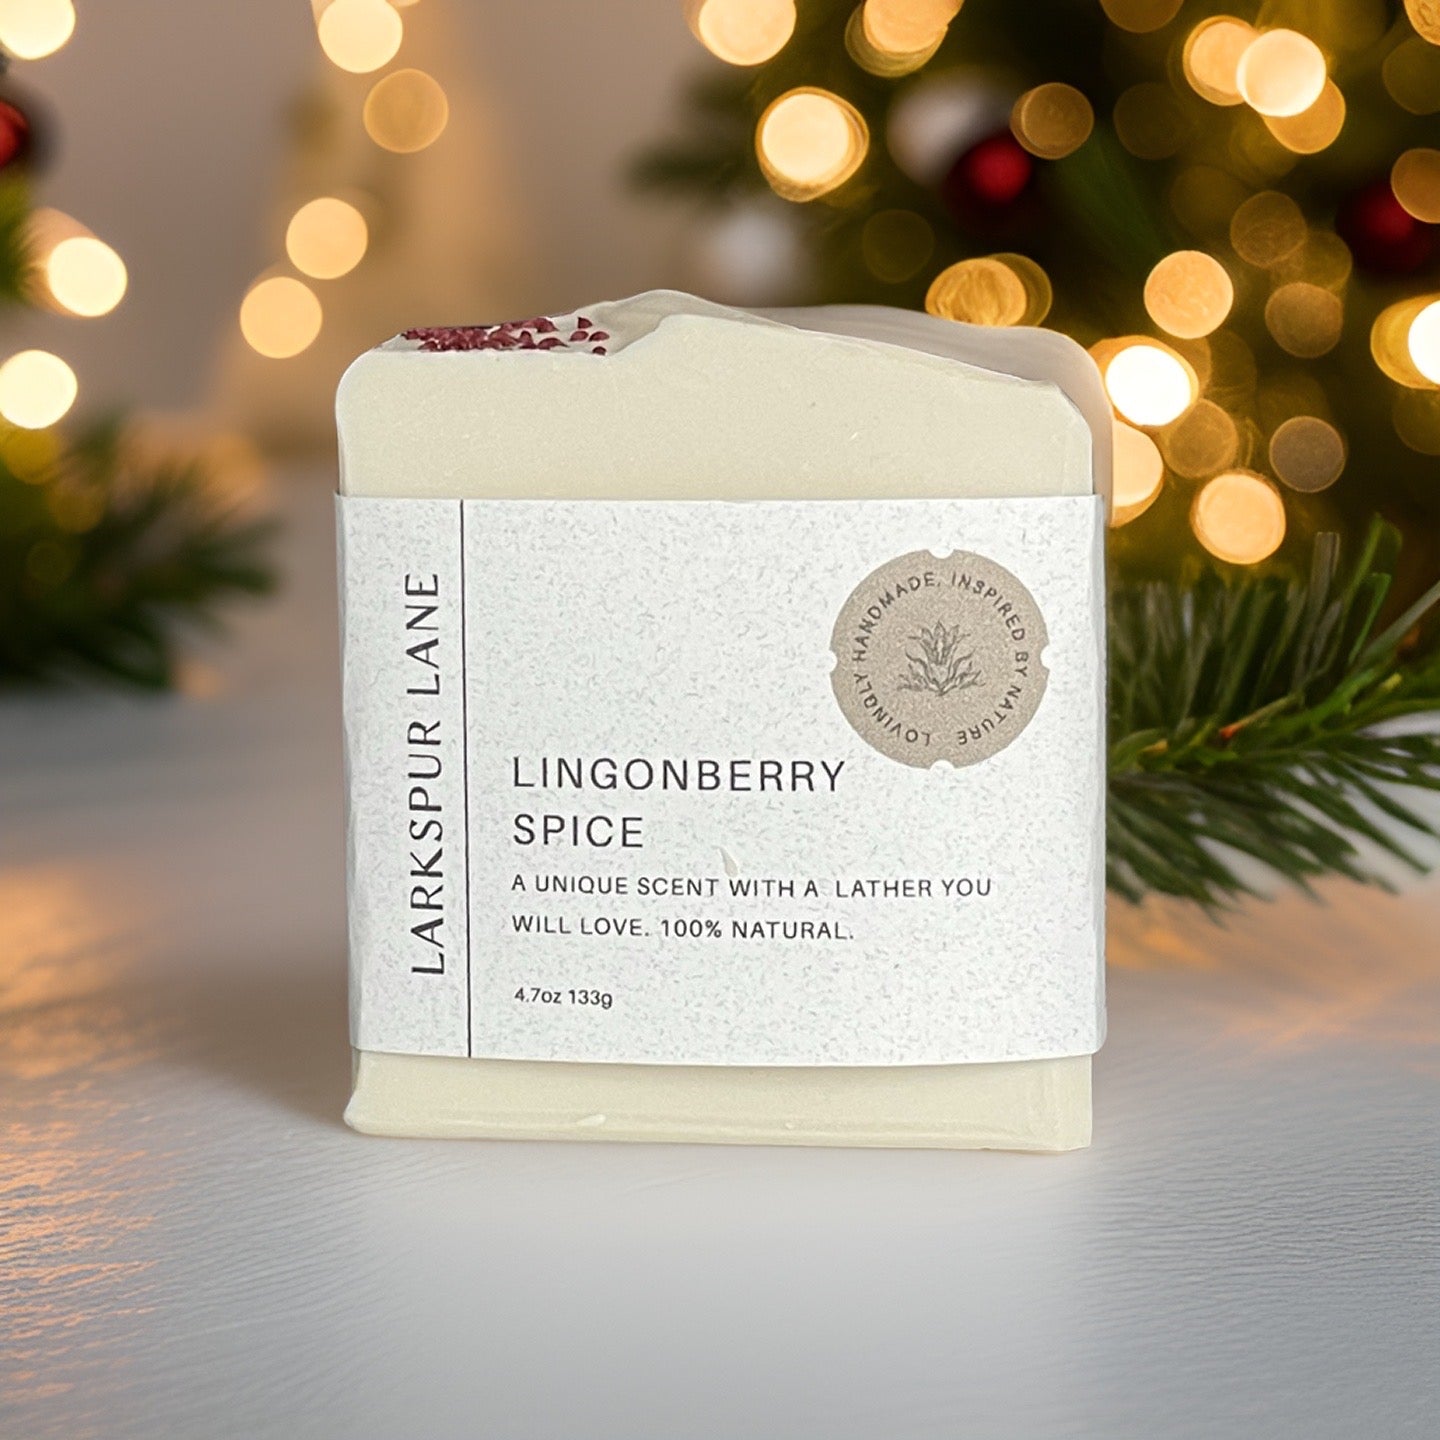 Lingonberry Spice Soap